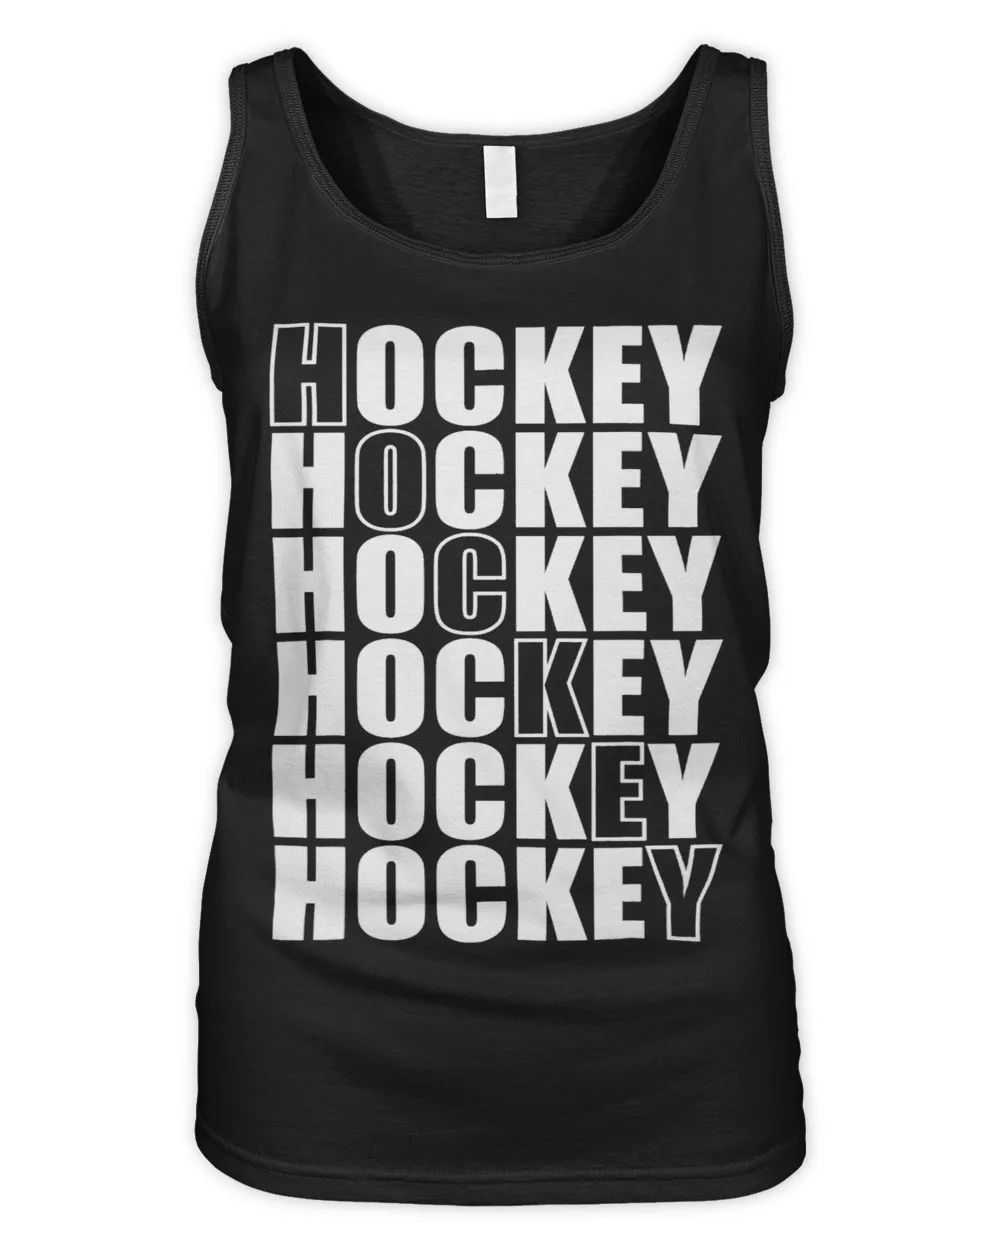 Hockey Fan design for hobby or professional ice hockey players